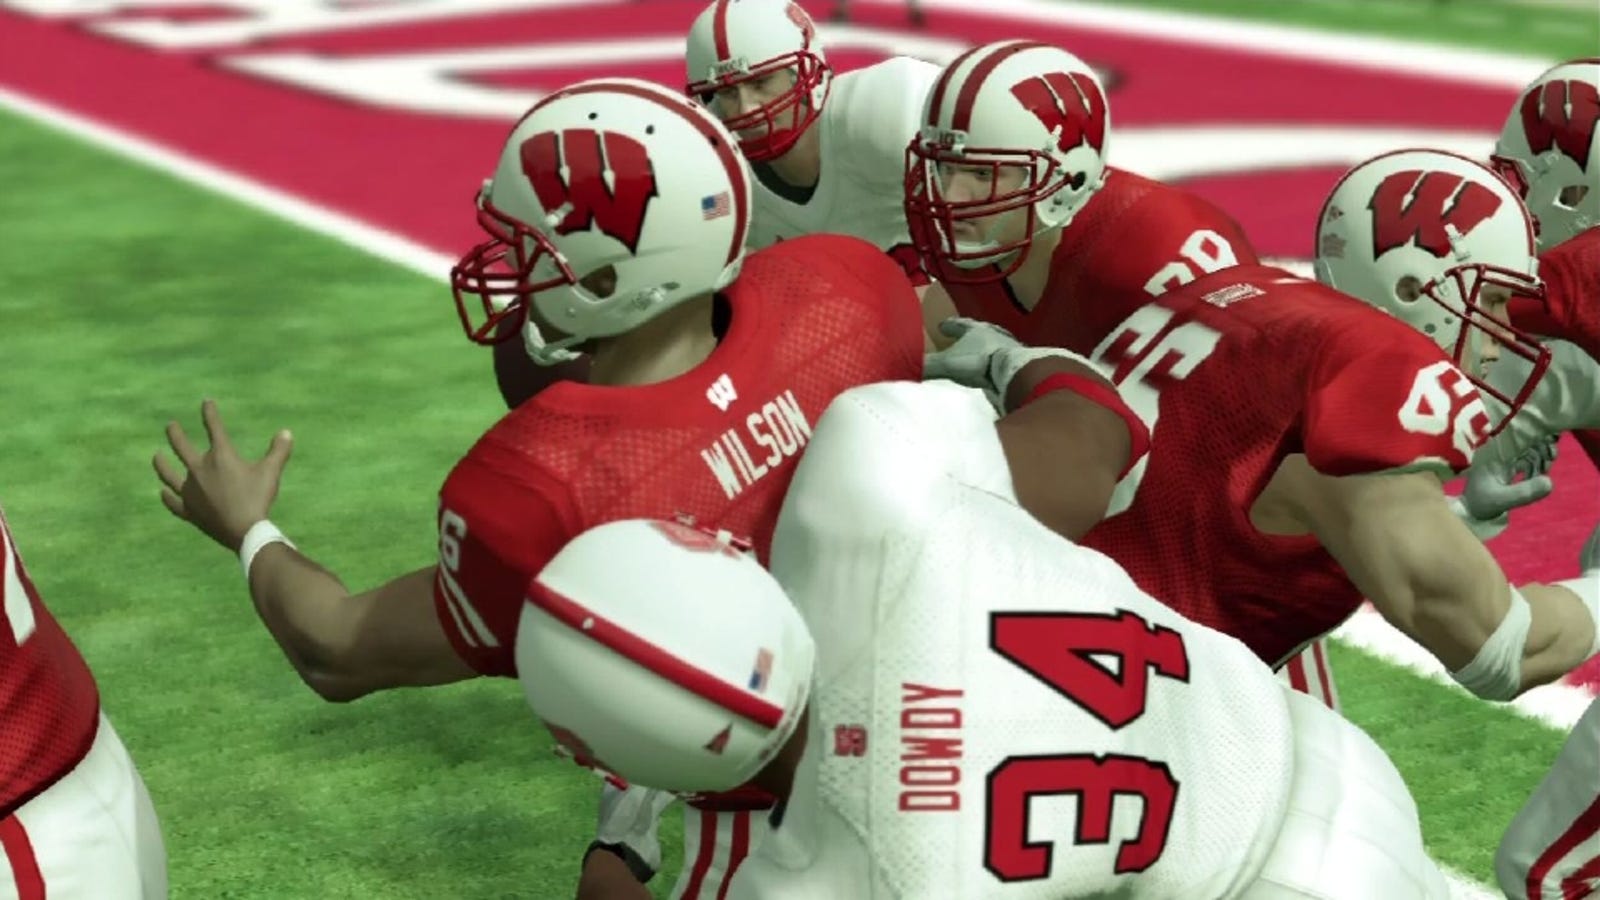 Named Rosters Already Available for NCAA Football 12